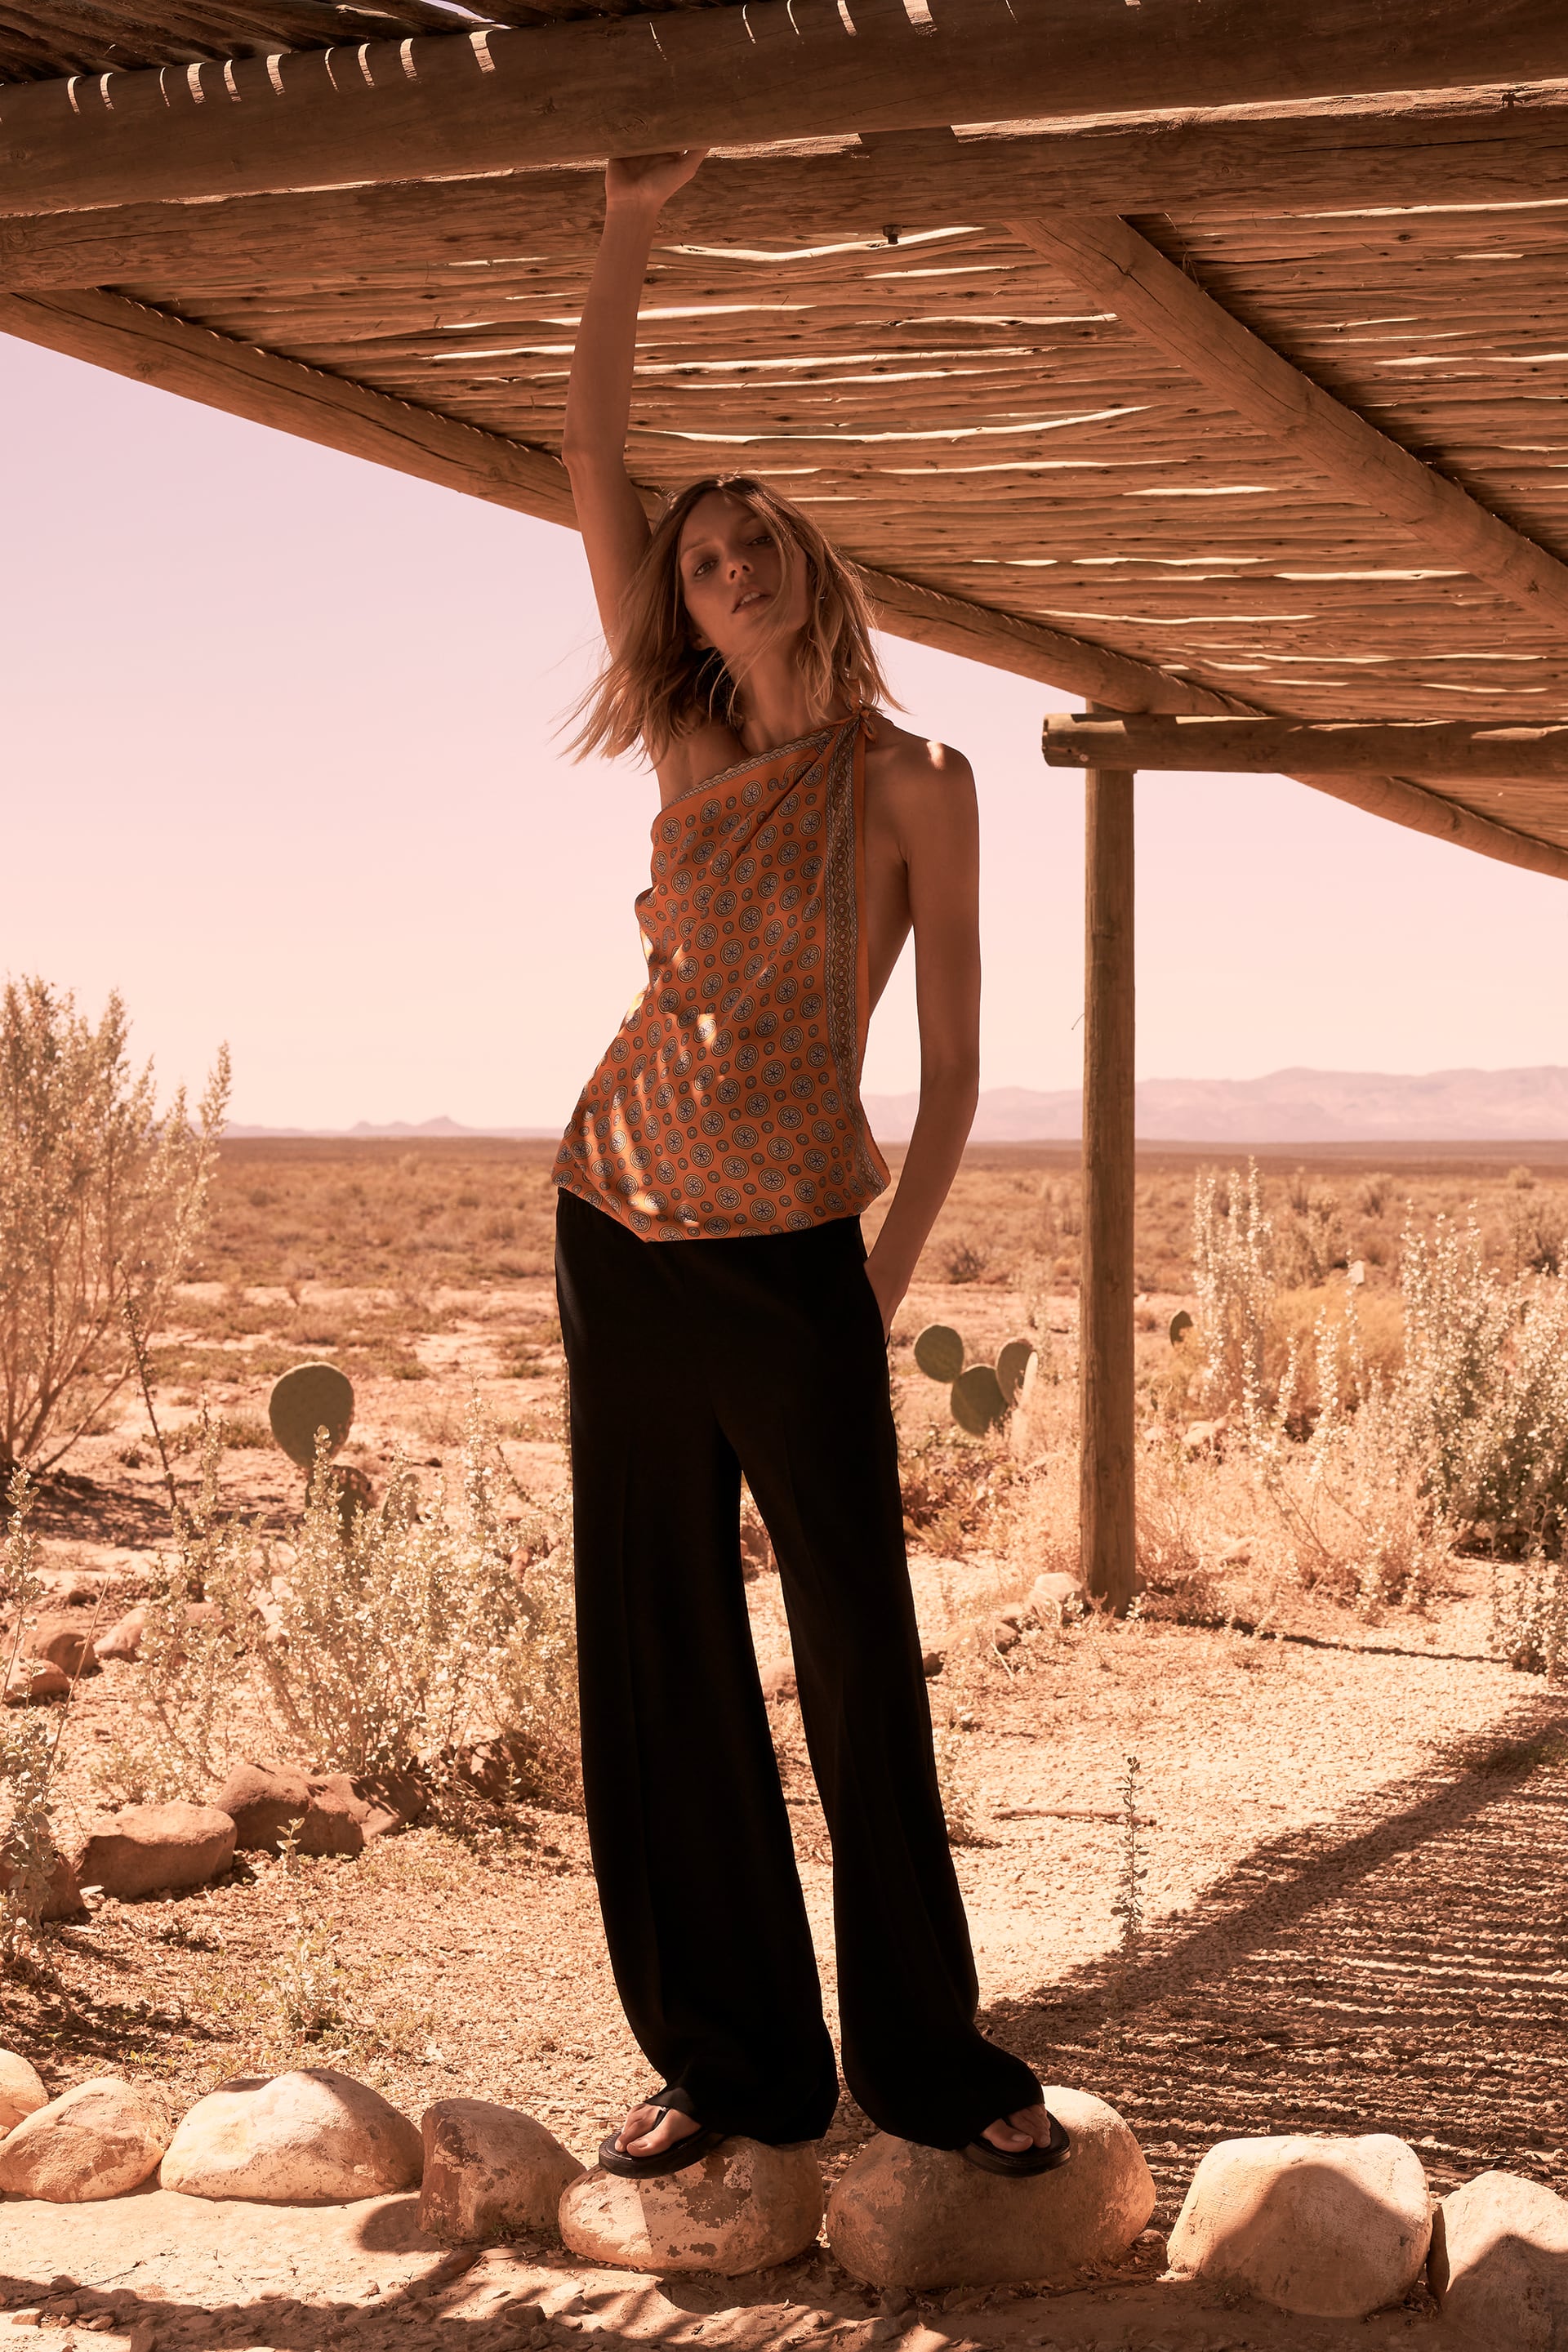 Zara’s Summer Collection Just Dropped—and It’s Very, Very Good